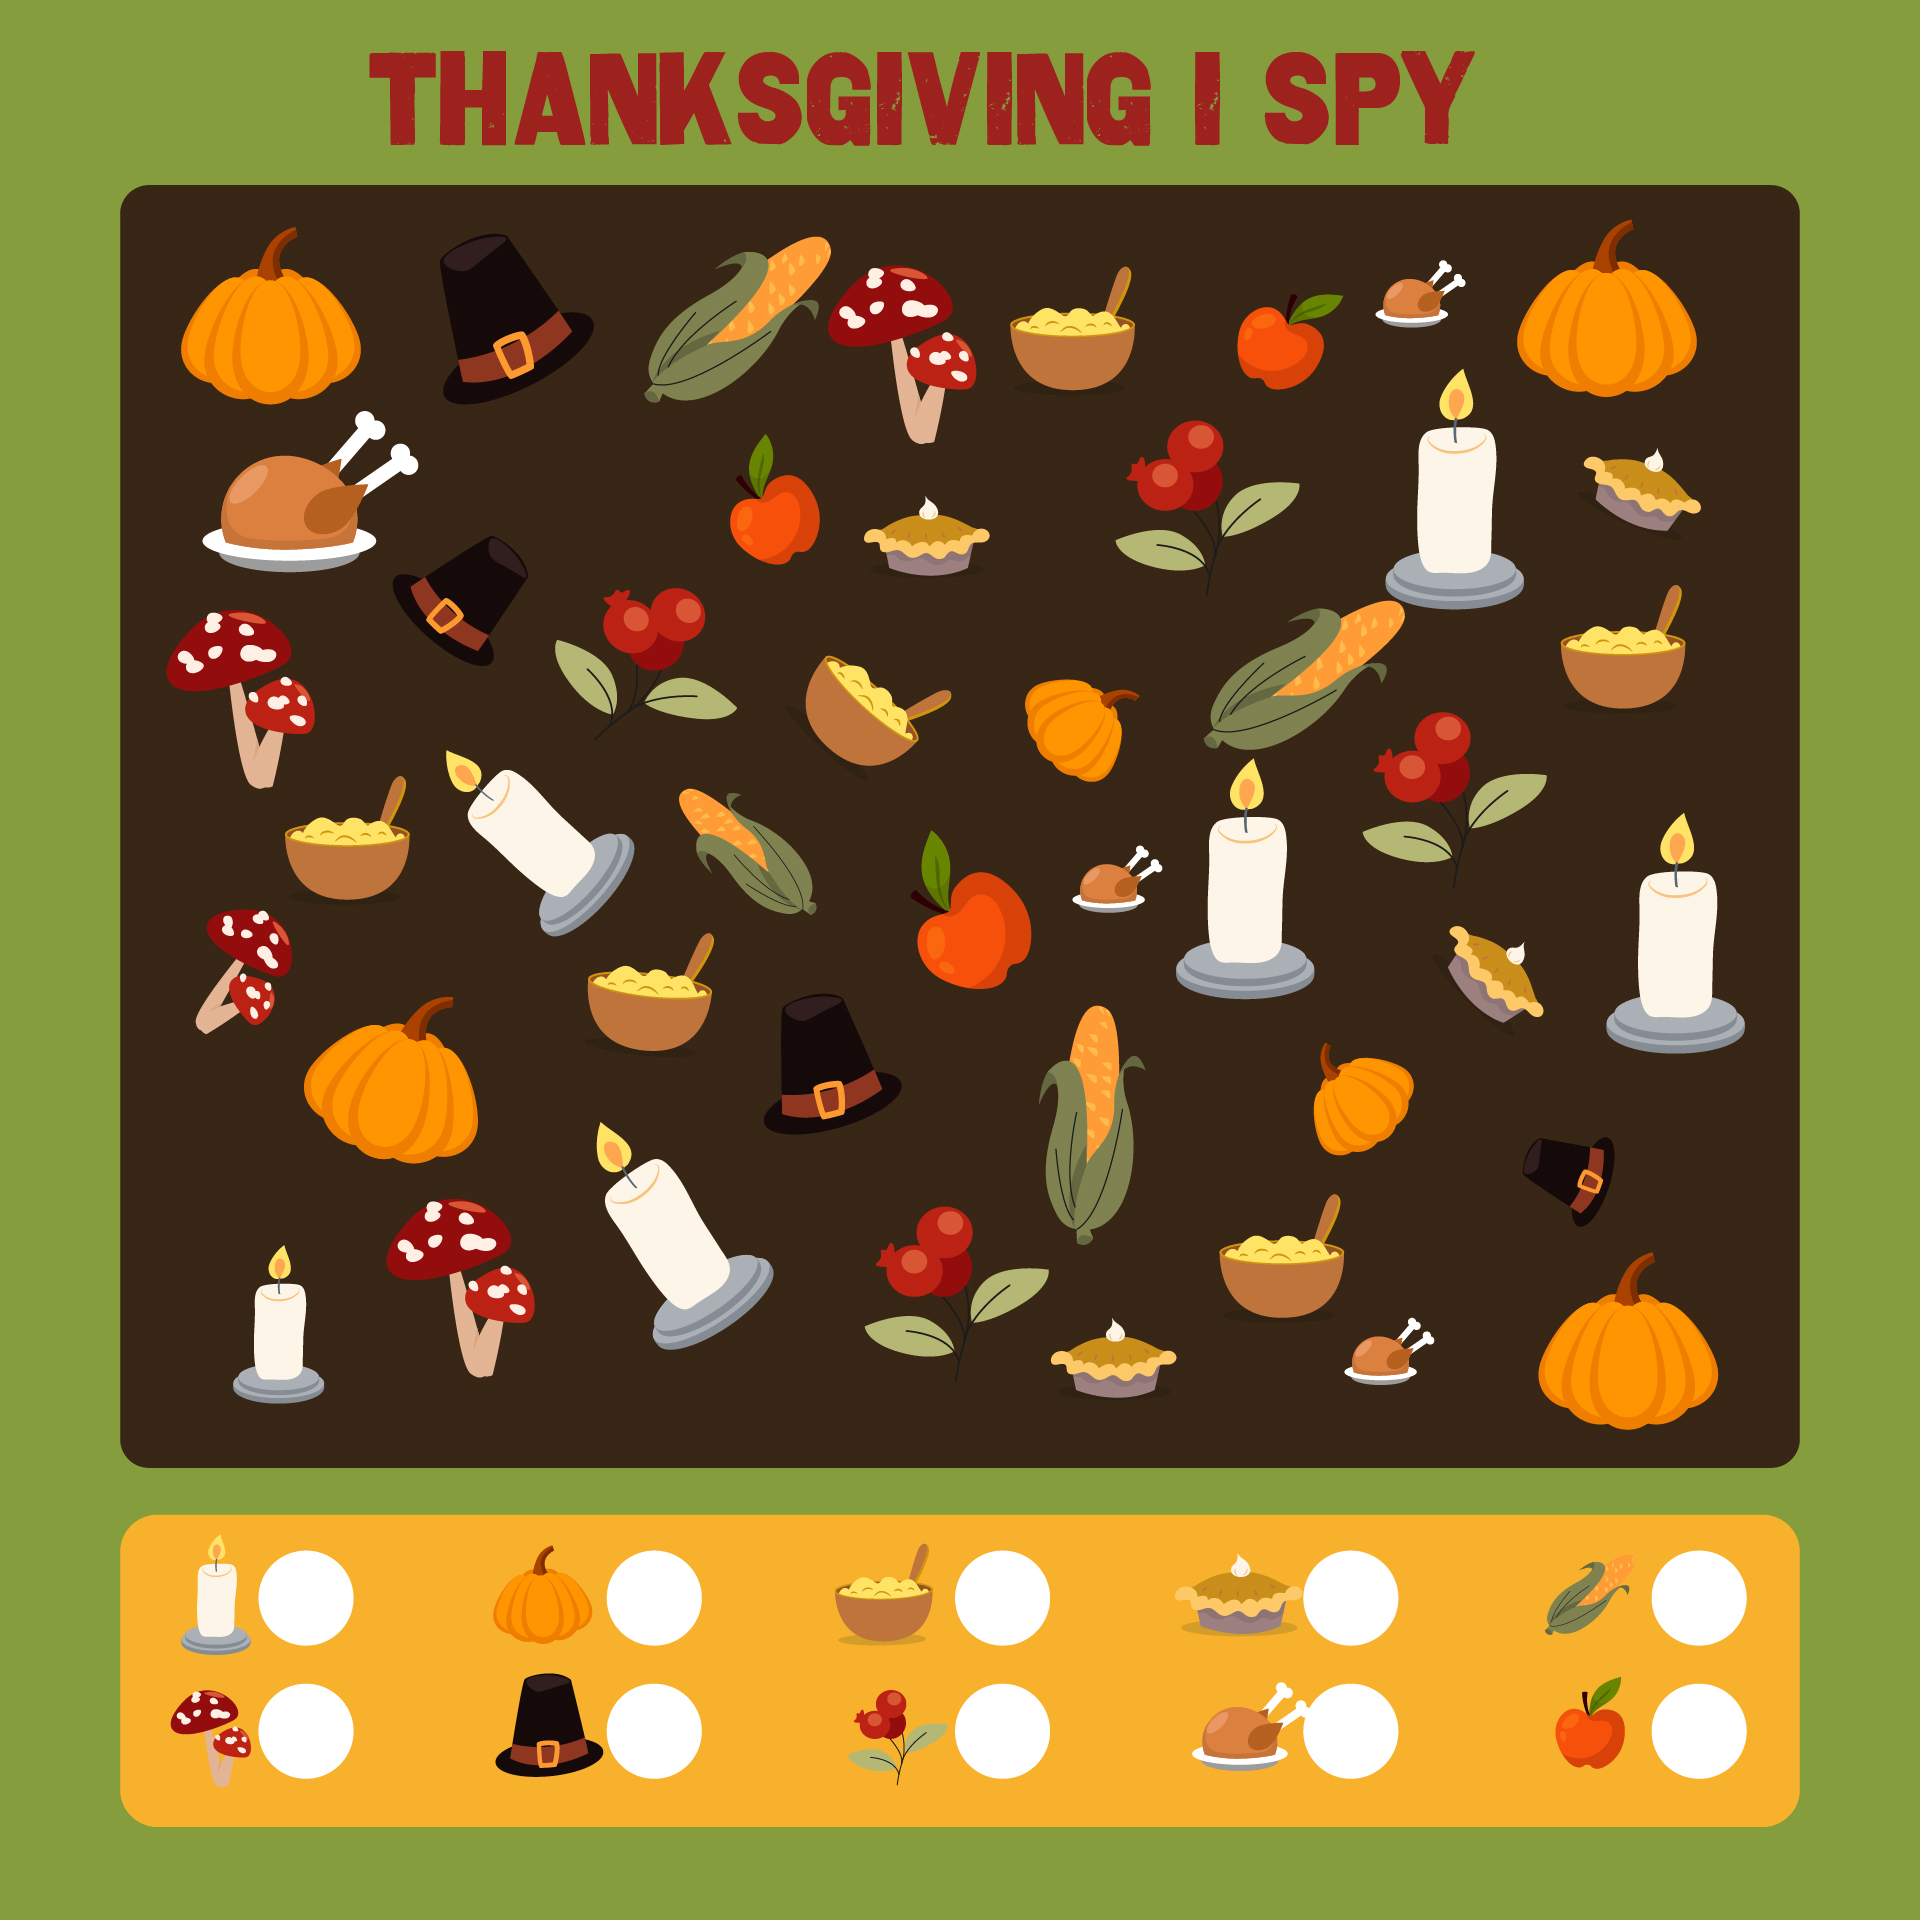 I Spy Thanksgiving Dinner Printable Seek And Find Activity